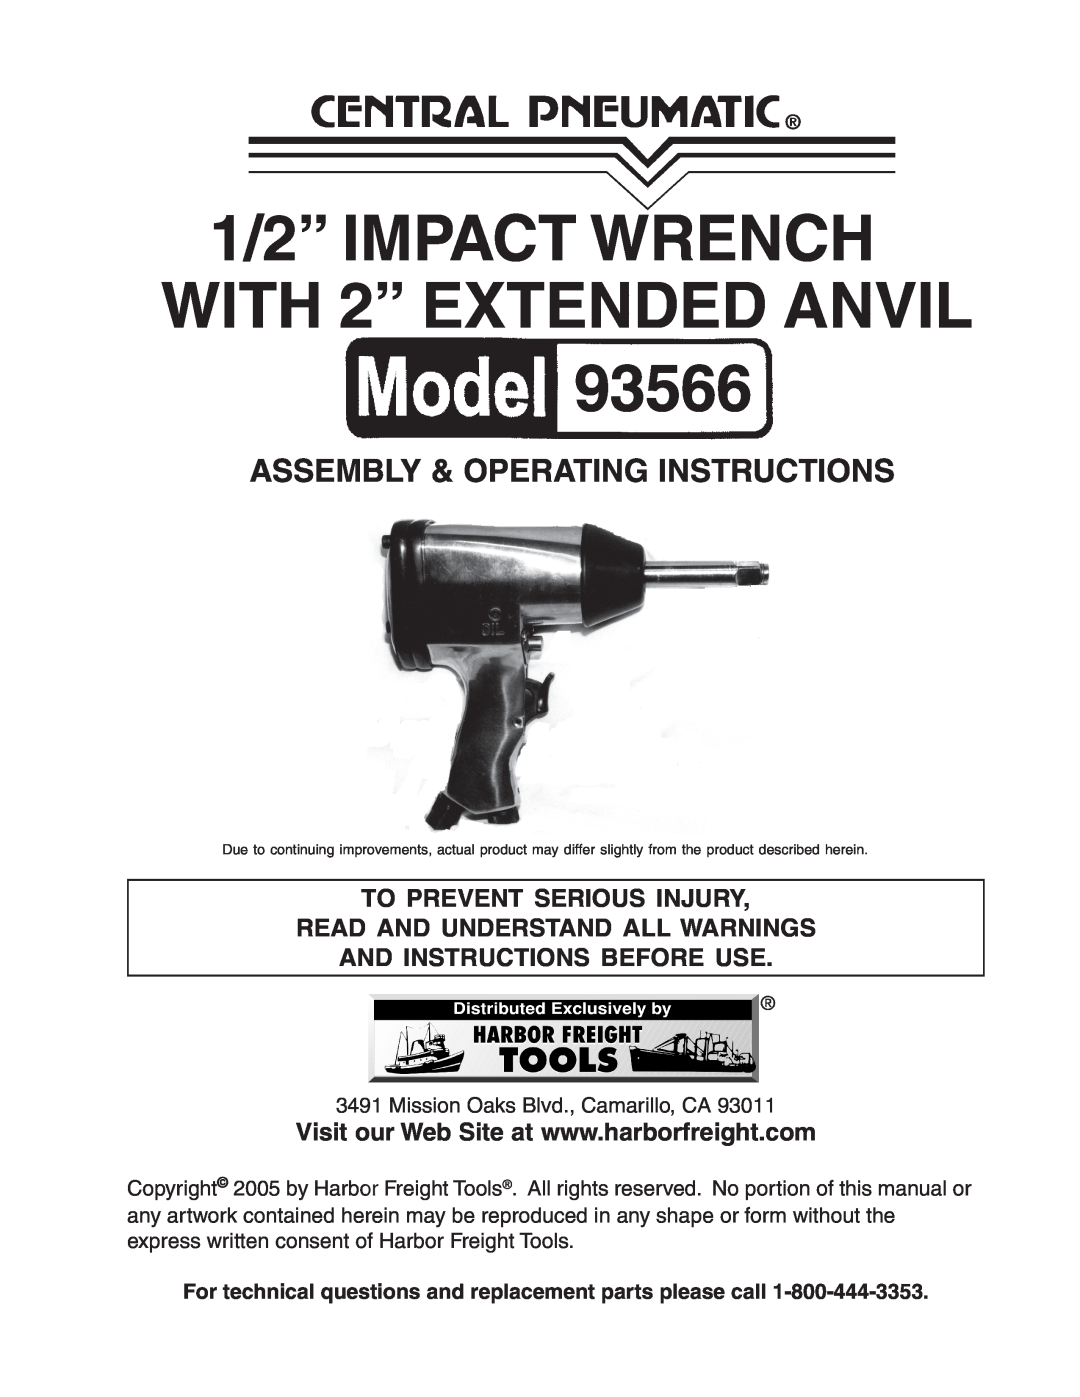 Harbor Freight Tools 93566 operating instructions 1/2” IMPACT WRENCH WITH 2” EXTENDED ANVIL, And Instructions Before Use 